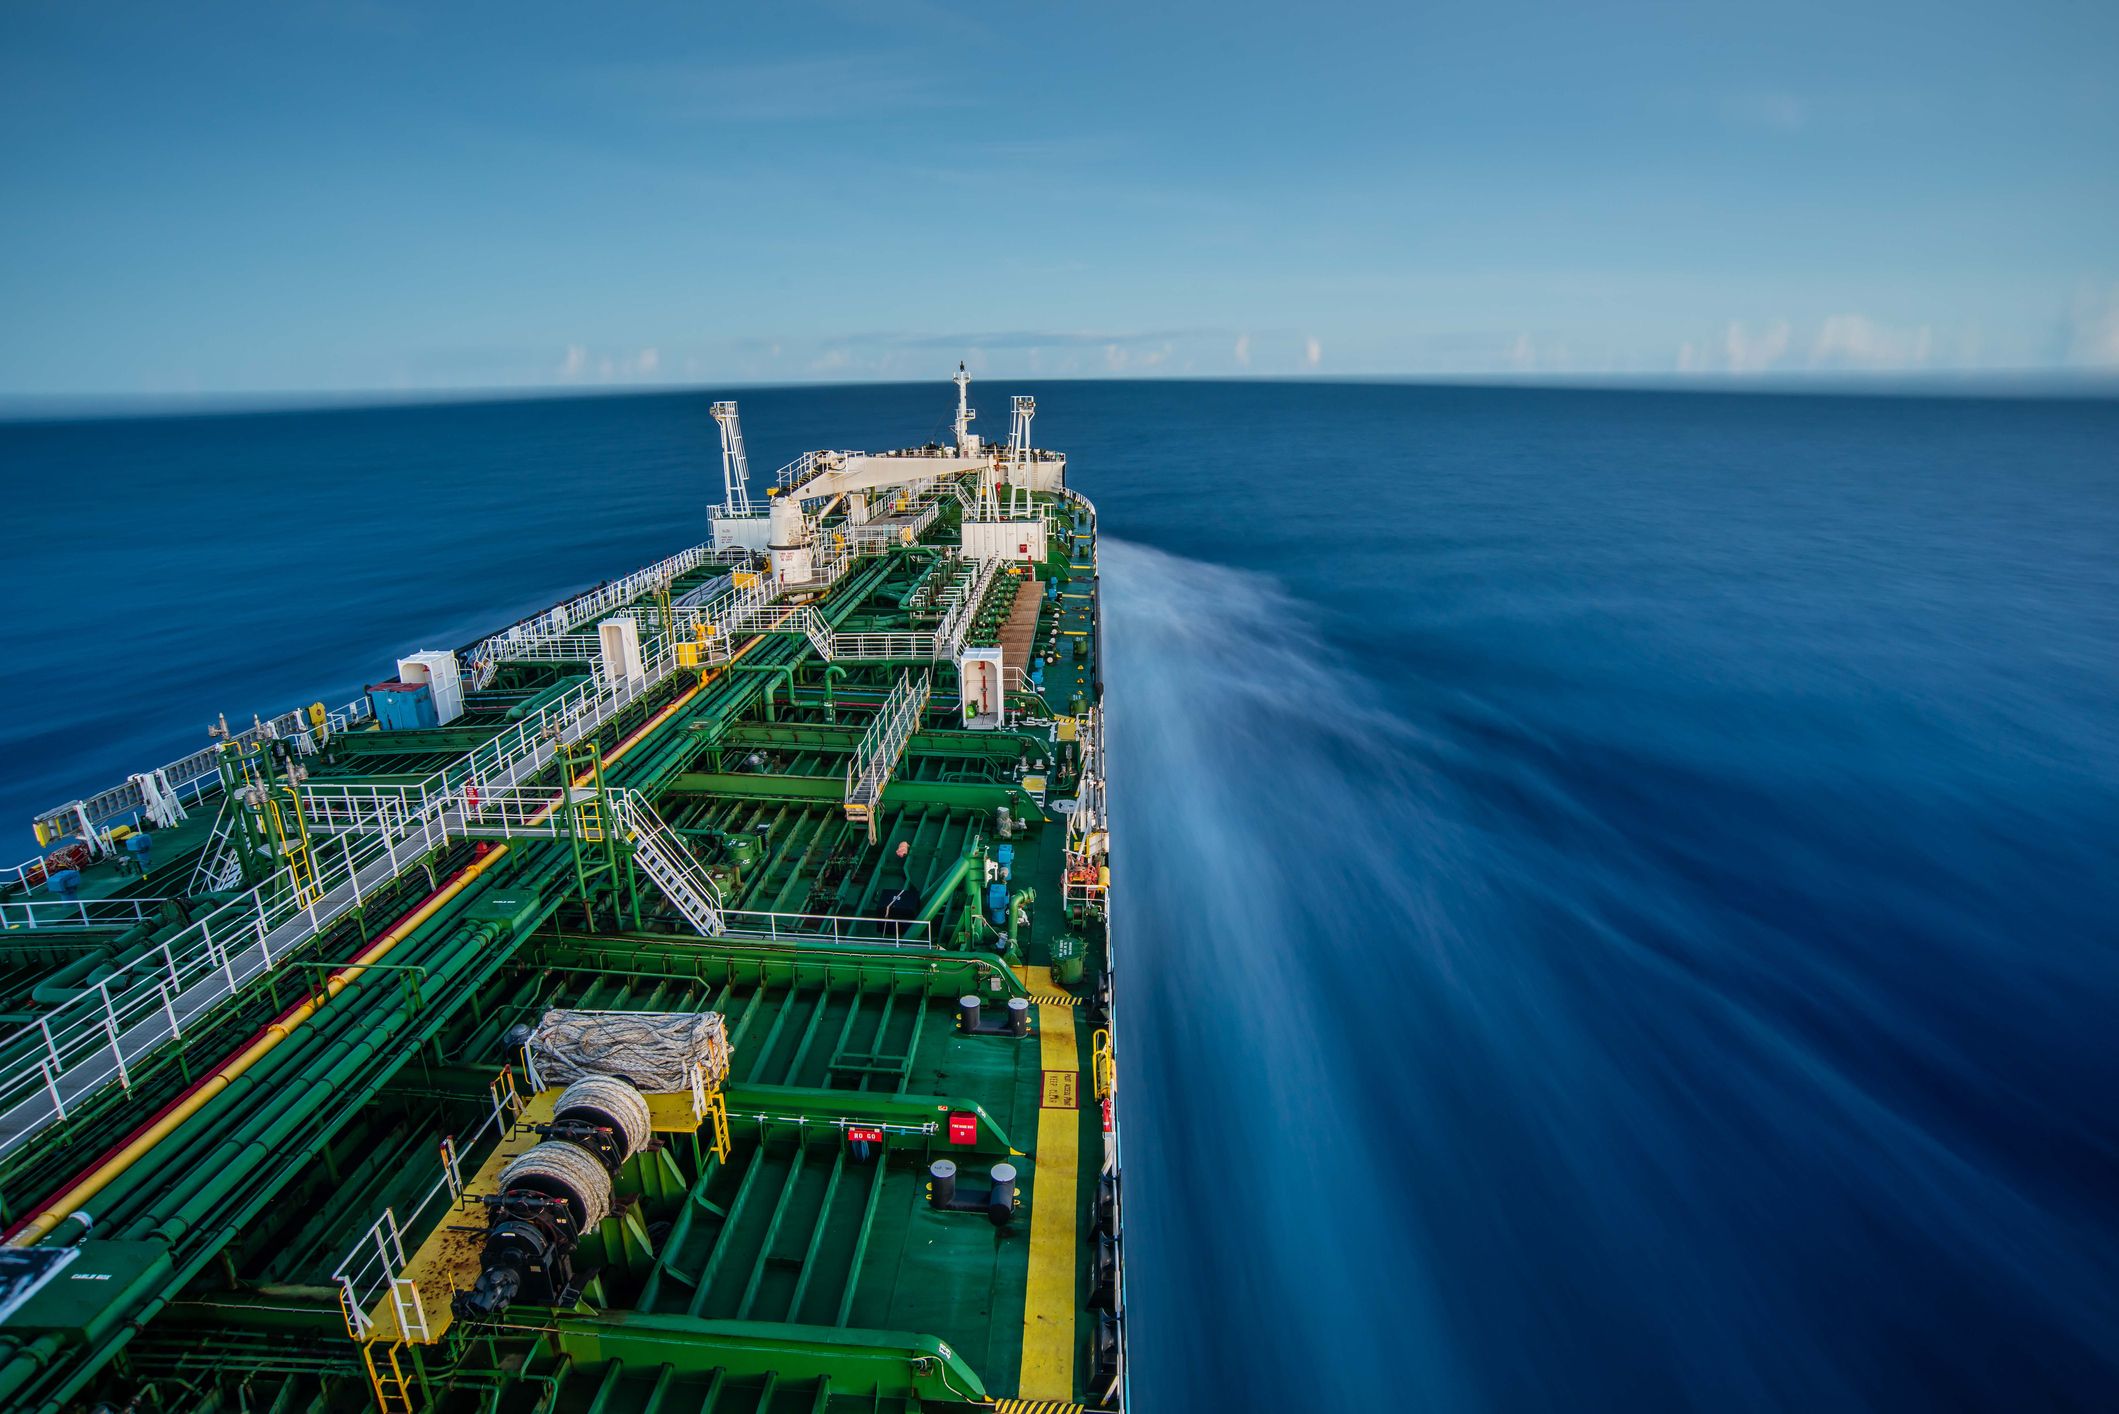 The European regulation will force shipping companies to make significant efforts to renew their fleet by purchasing new ships powered by alternative fuels. (Getty Images)